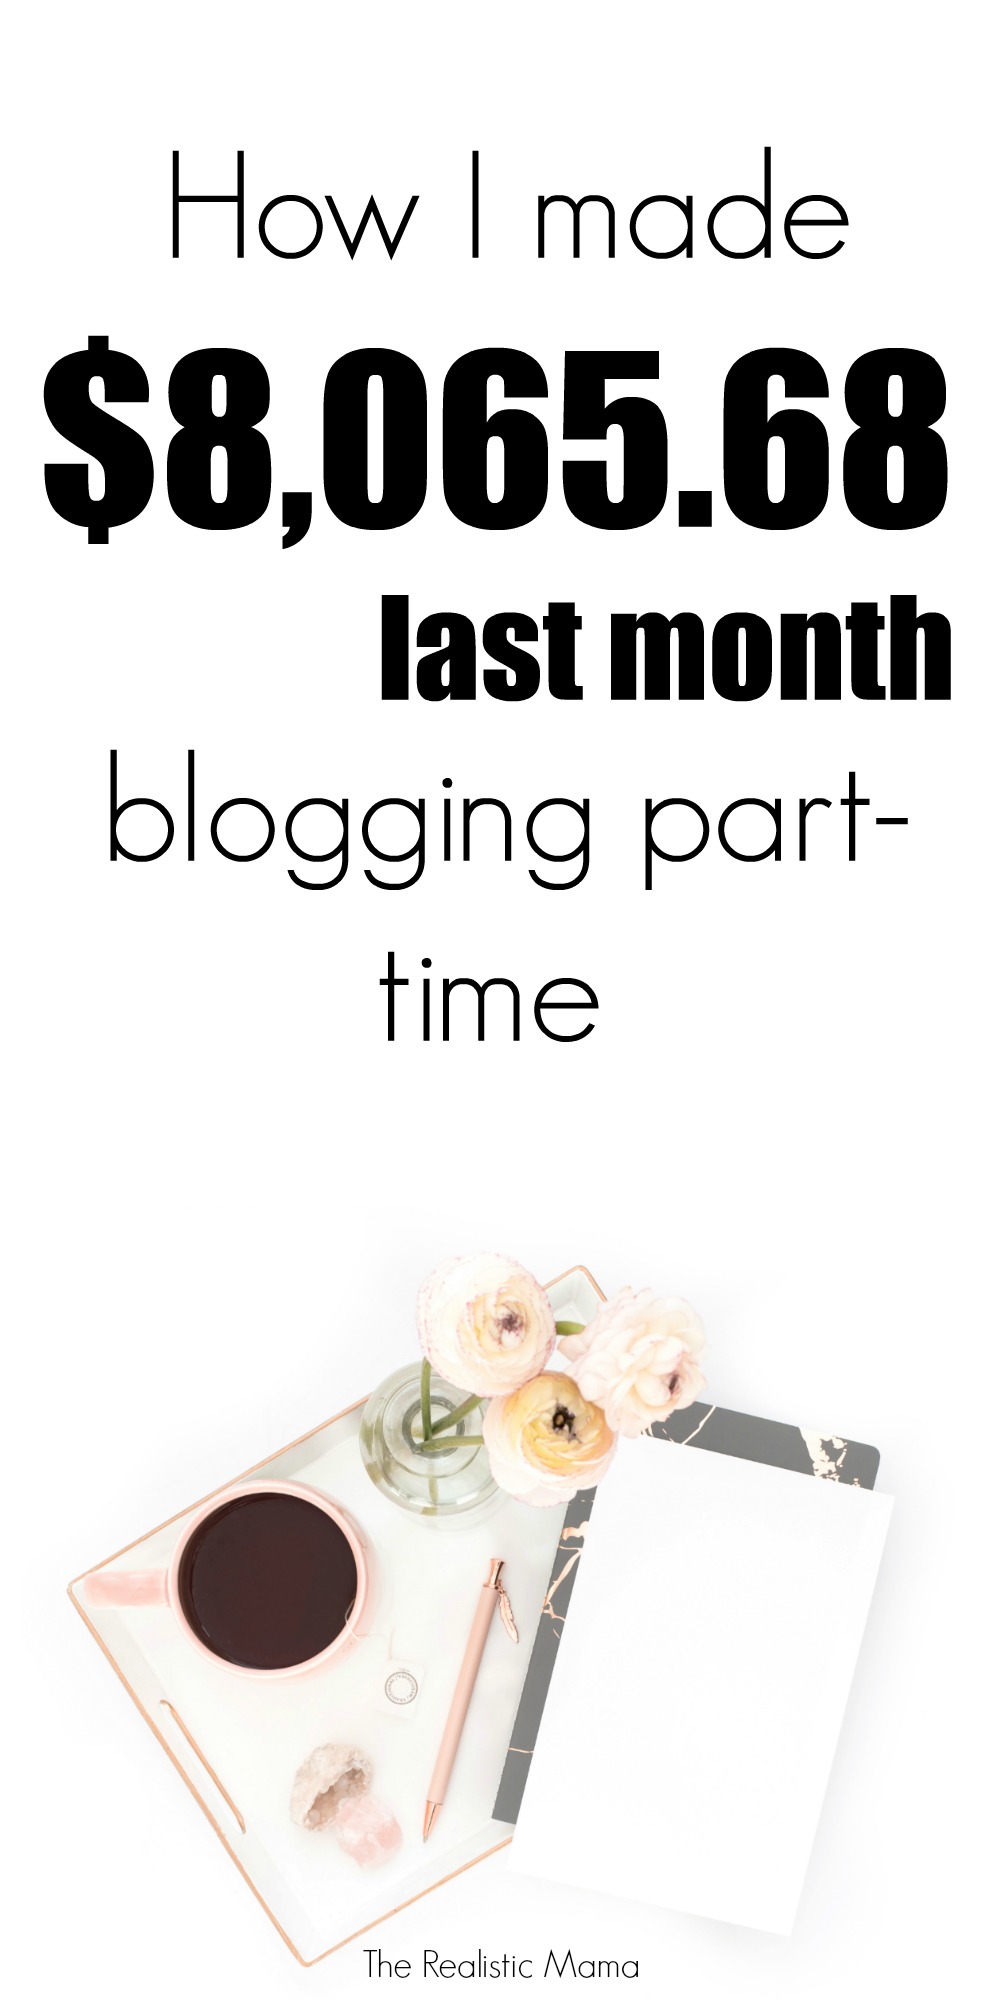 How I made $8065 last month blogging part-time